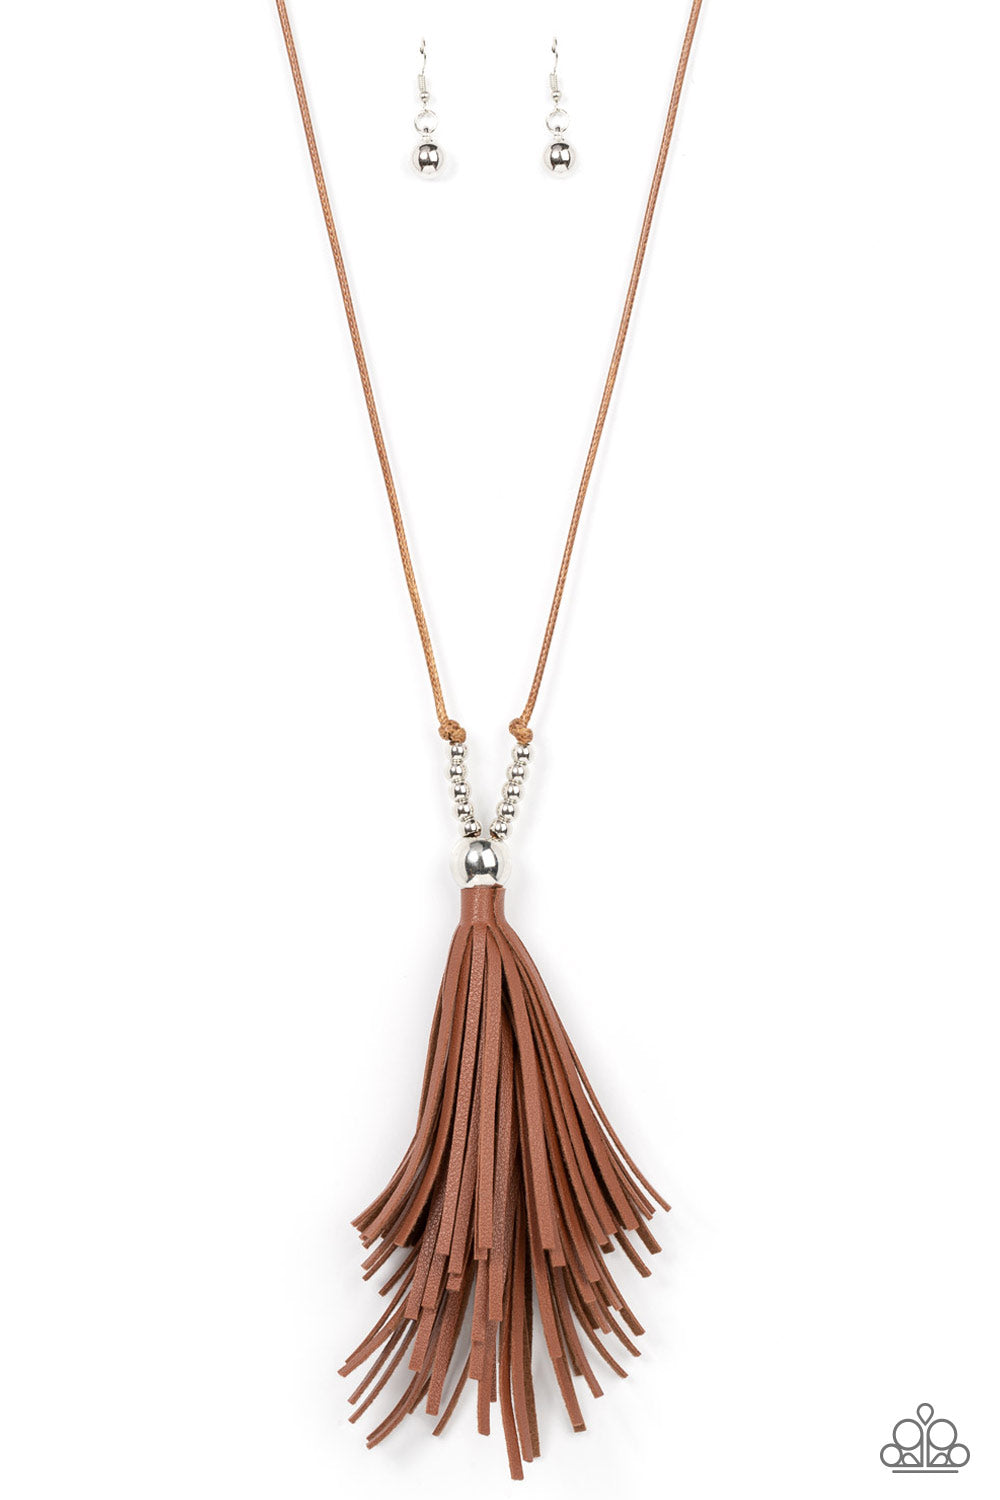 Paparazzi Accessories - A Clean Sweep - Brown Tassel Necklaces